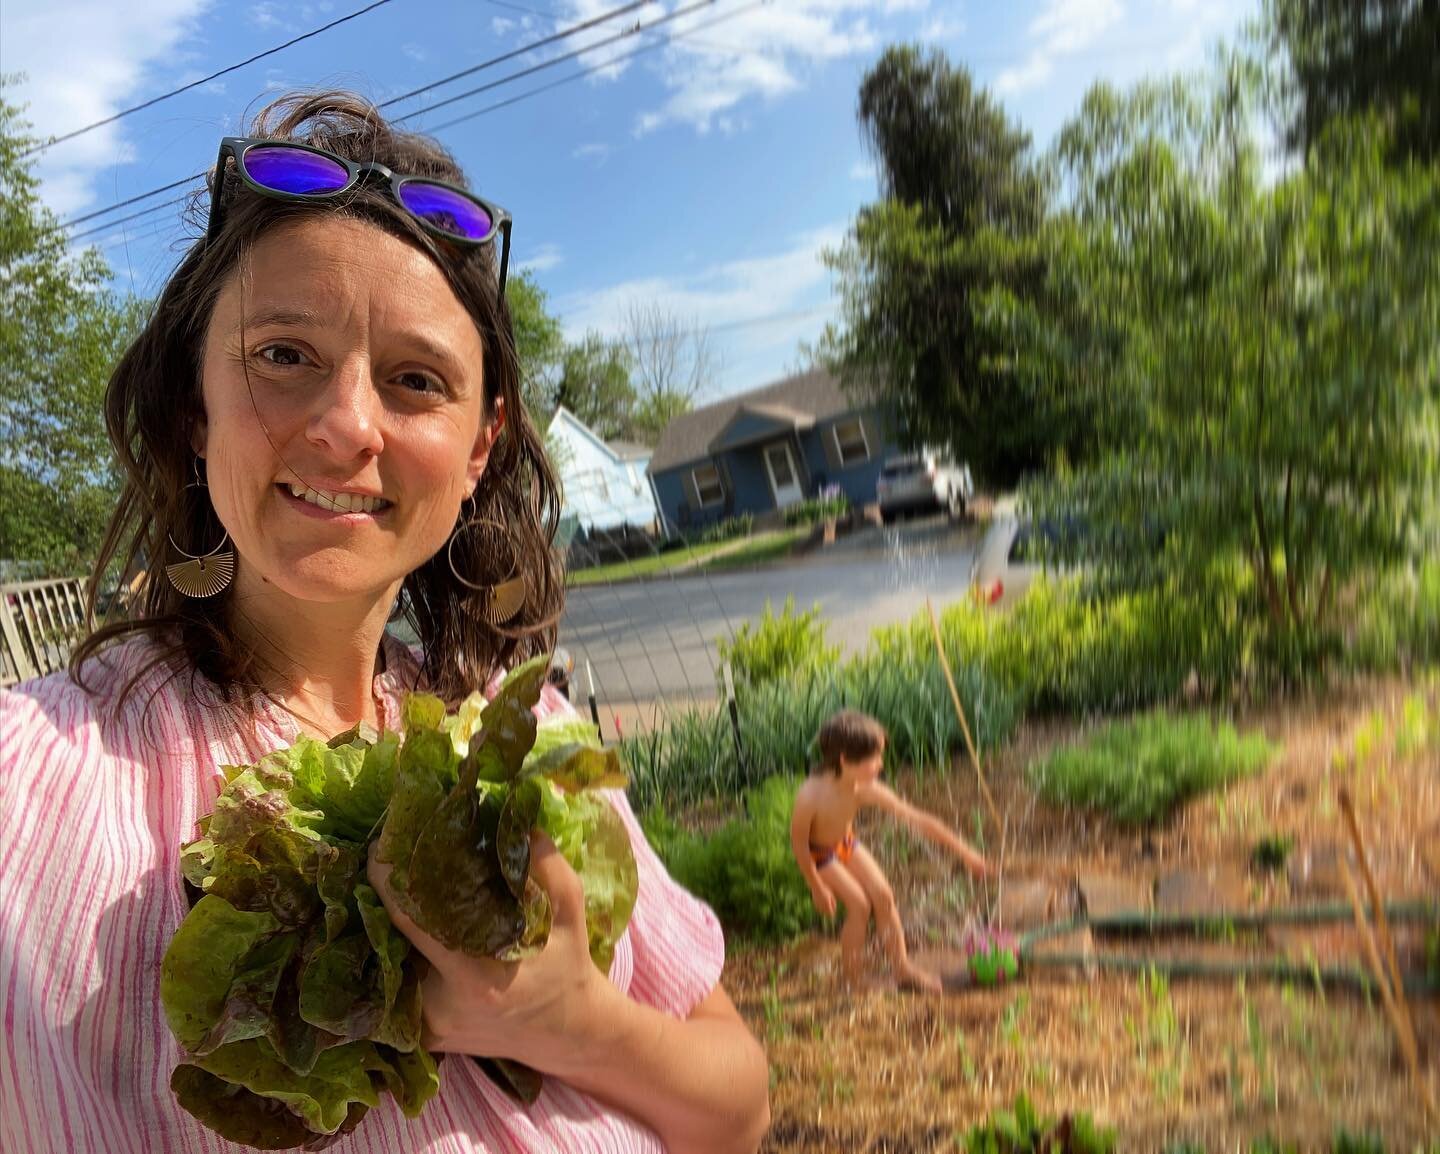 First things first. For me, getting home from a spring tour means heading to my front yard to pick greens. And of course, getting out the sprinkler. 

It&rsquo;s like walking into the future to get home after 10 days and see how each plant doubled in